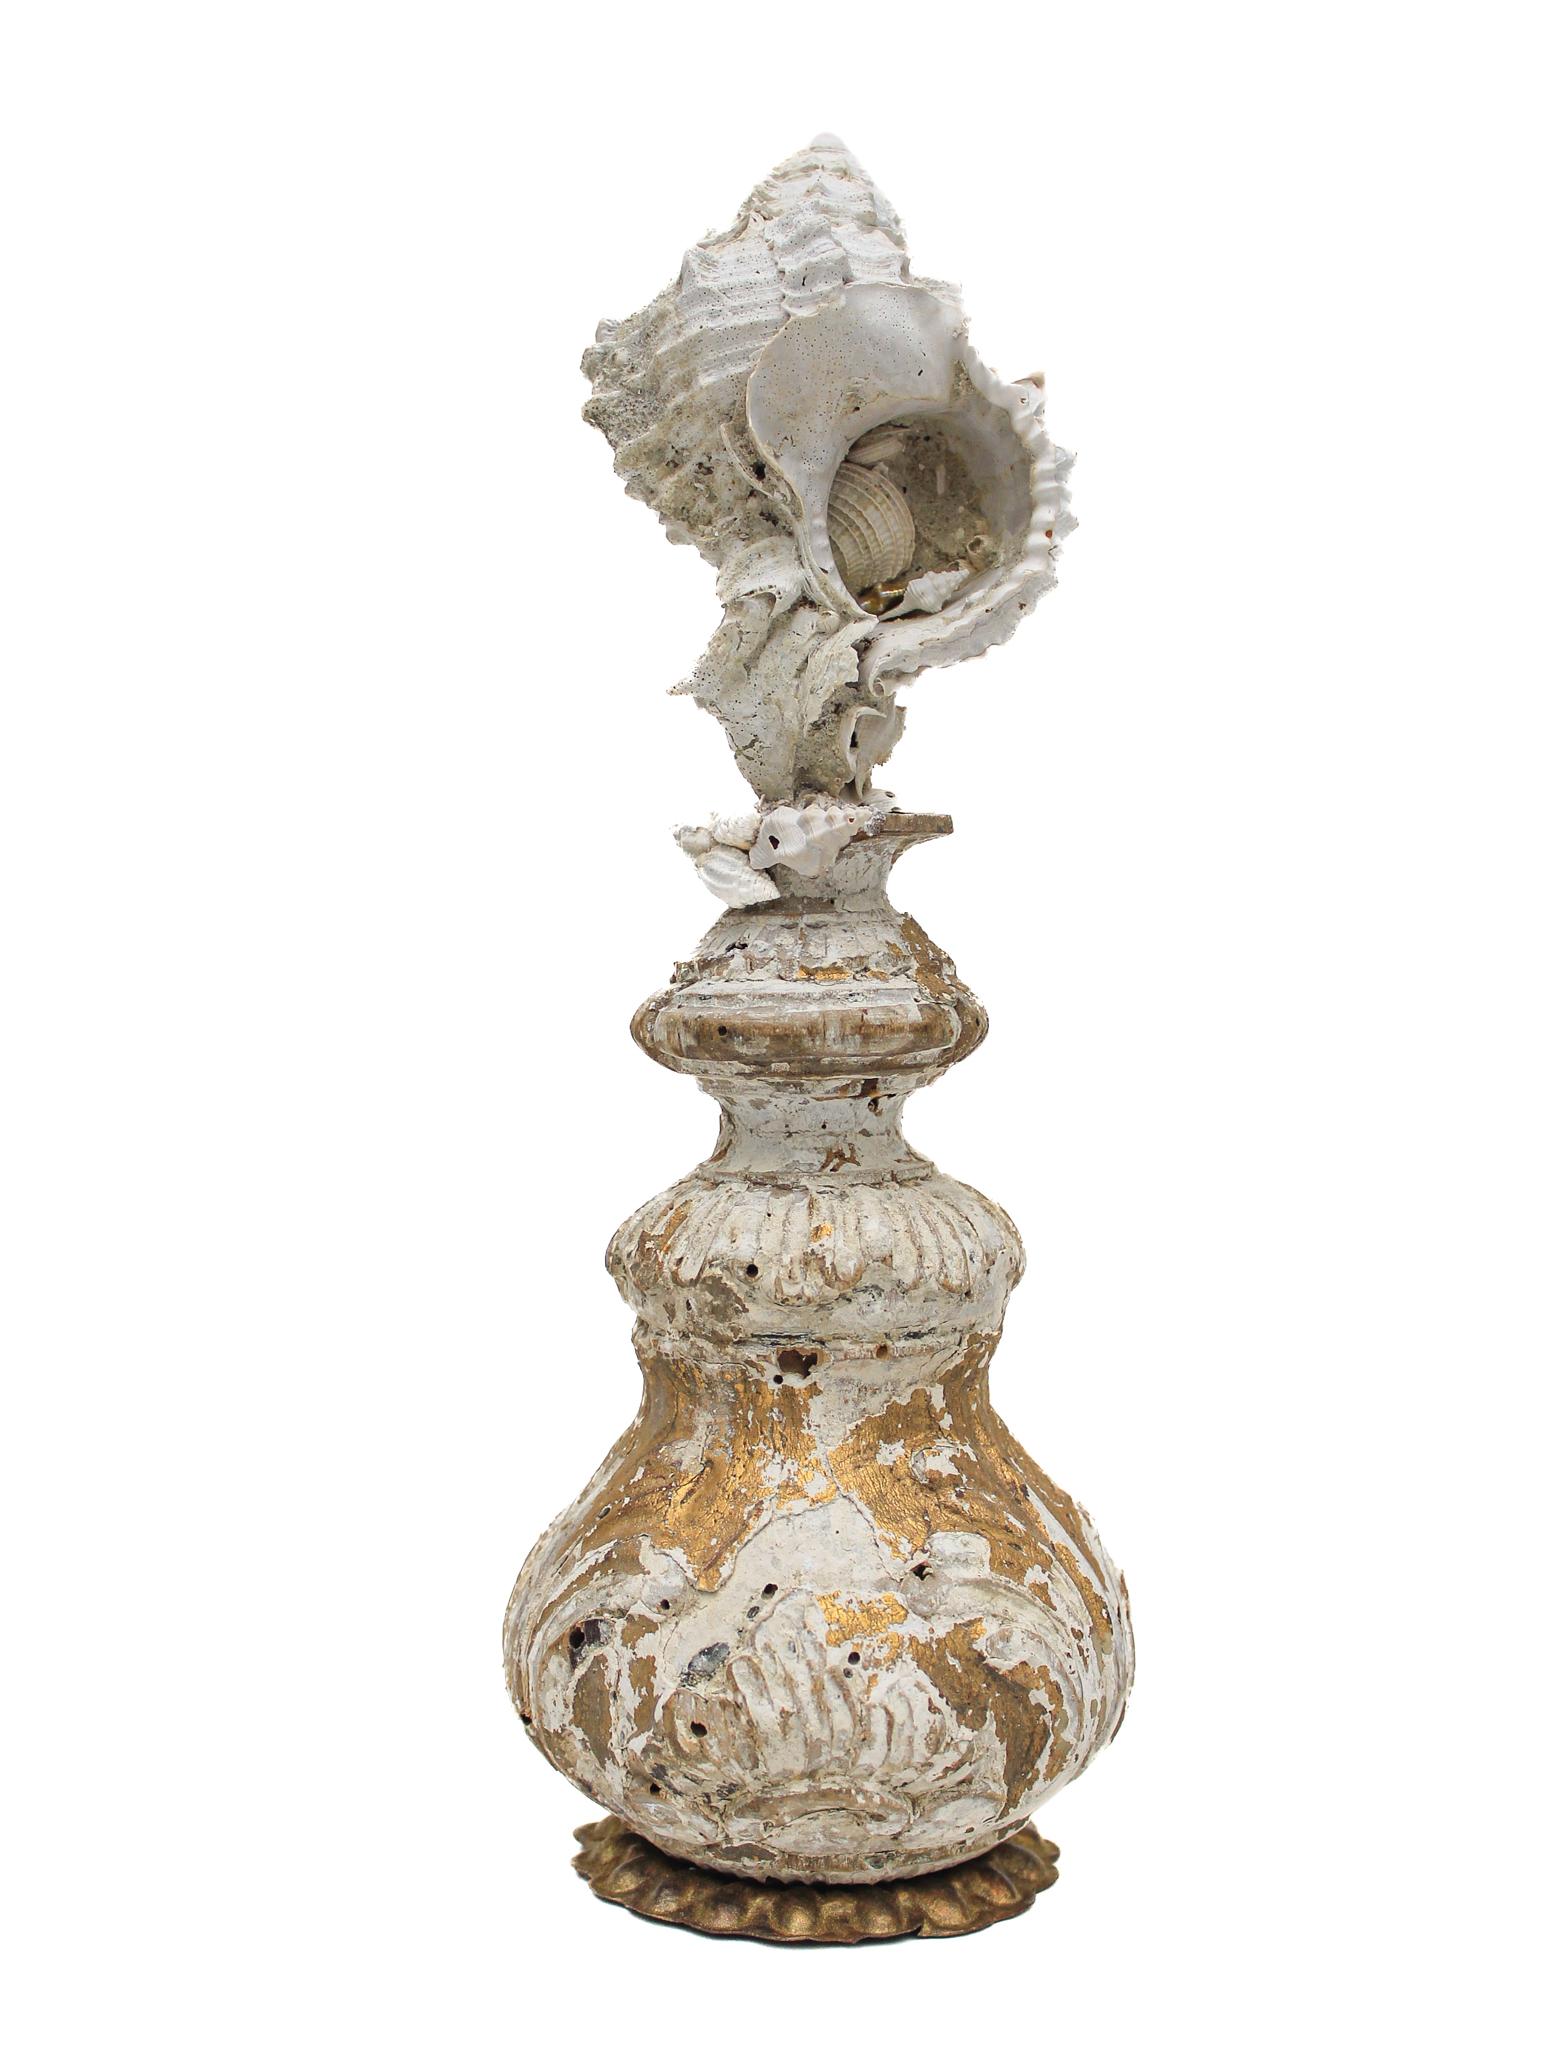 Rococo 17th Century Italian Vase with a Hystrivasum Shell on an Antique Metal Stand